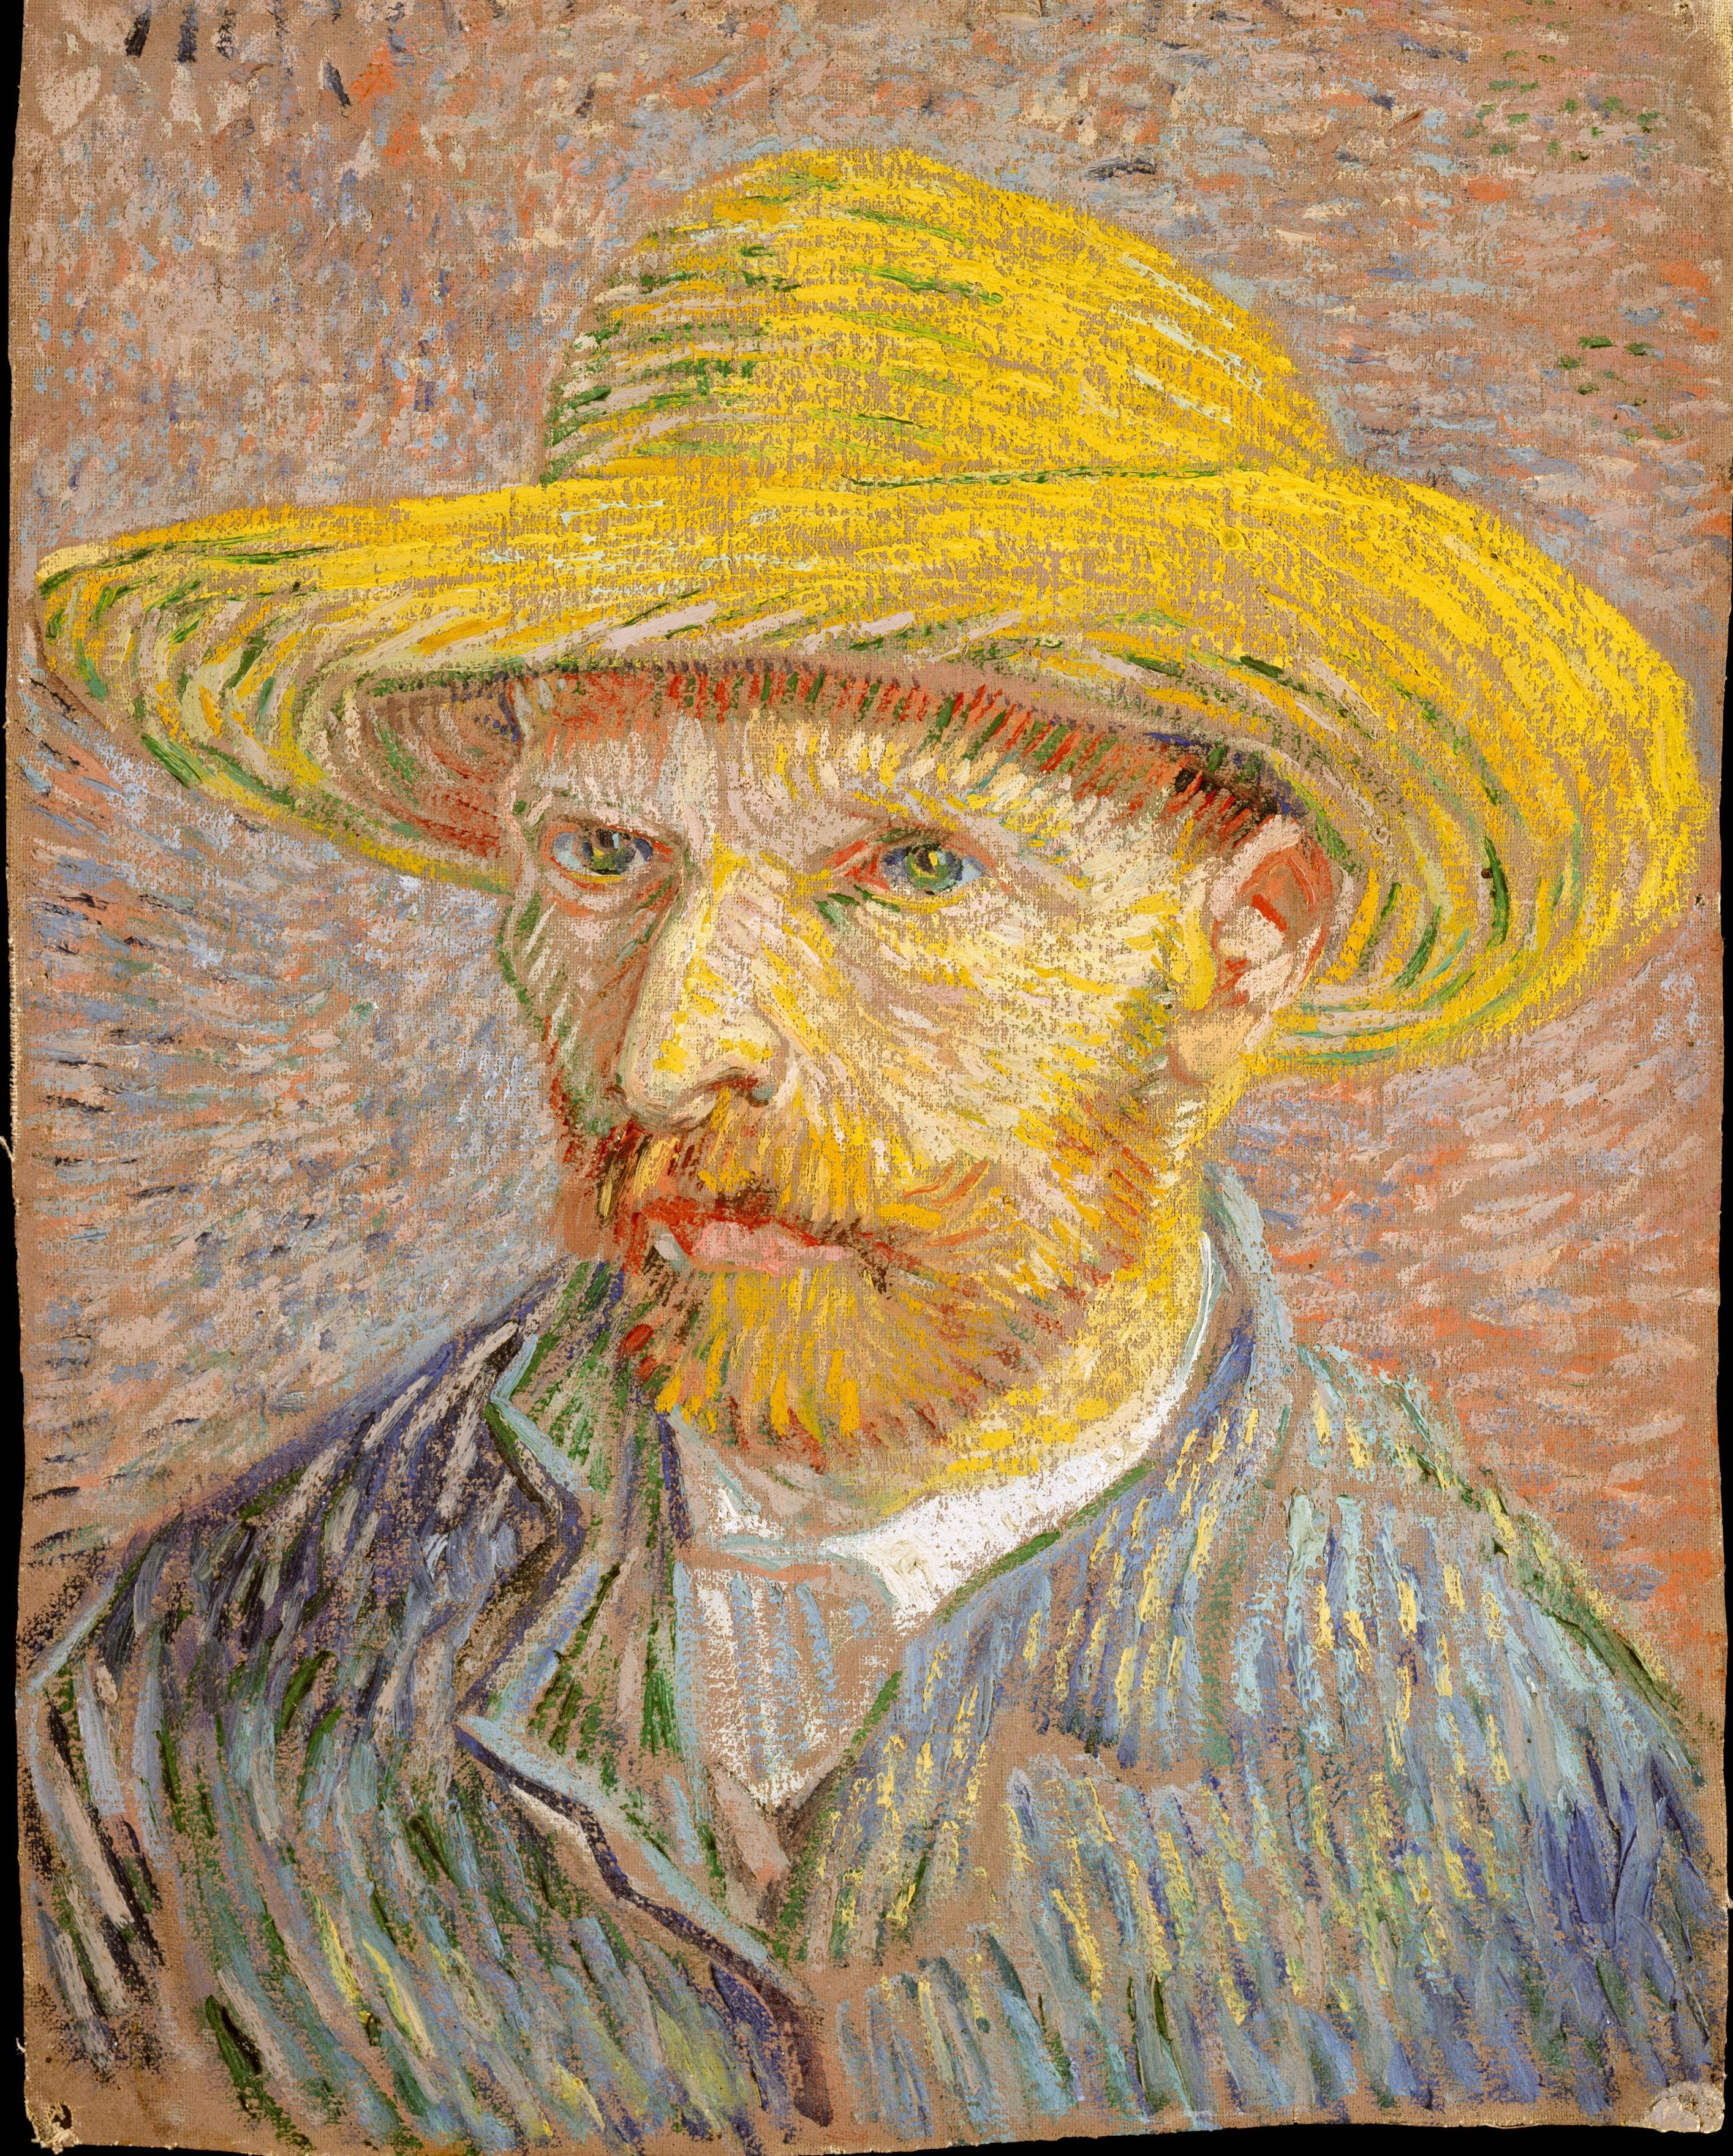 The Met's Van Gogh Paintings Are Usually Off Touring the World. Now, All 16  Have Been Reunited in New York At Last